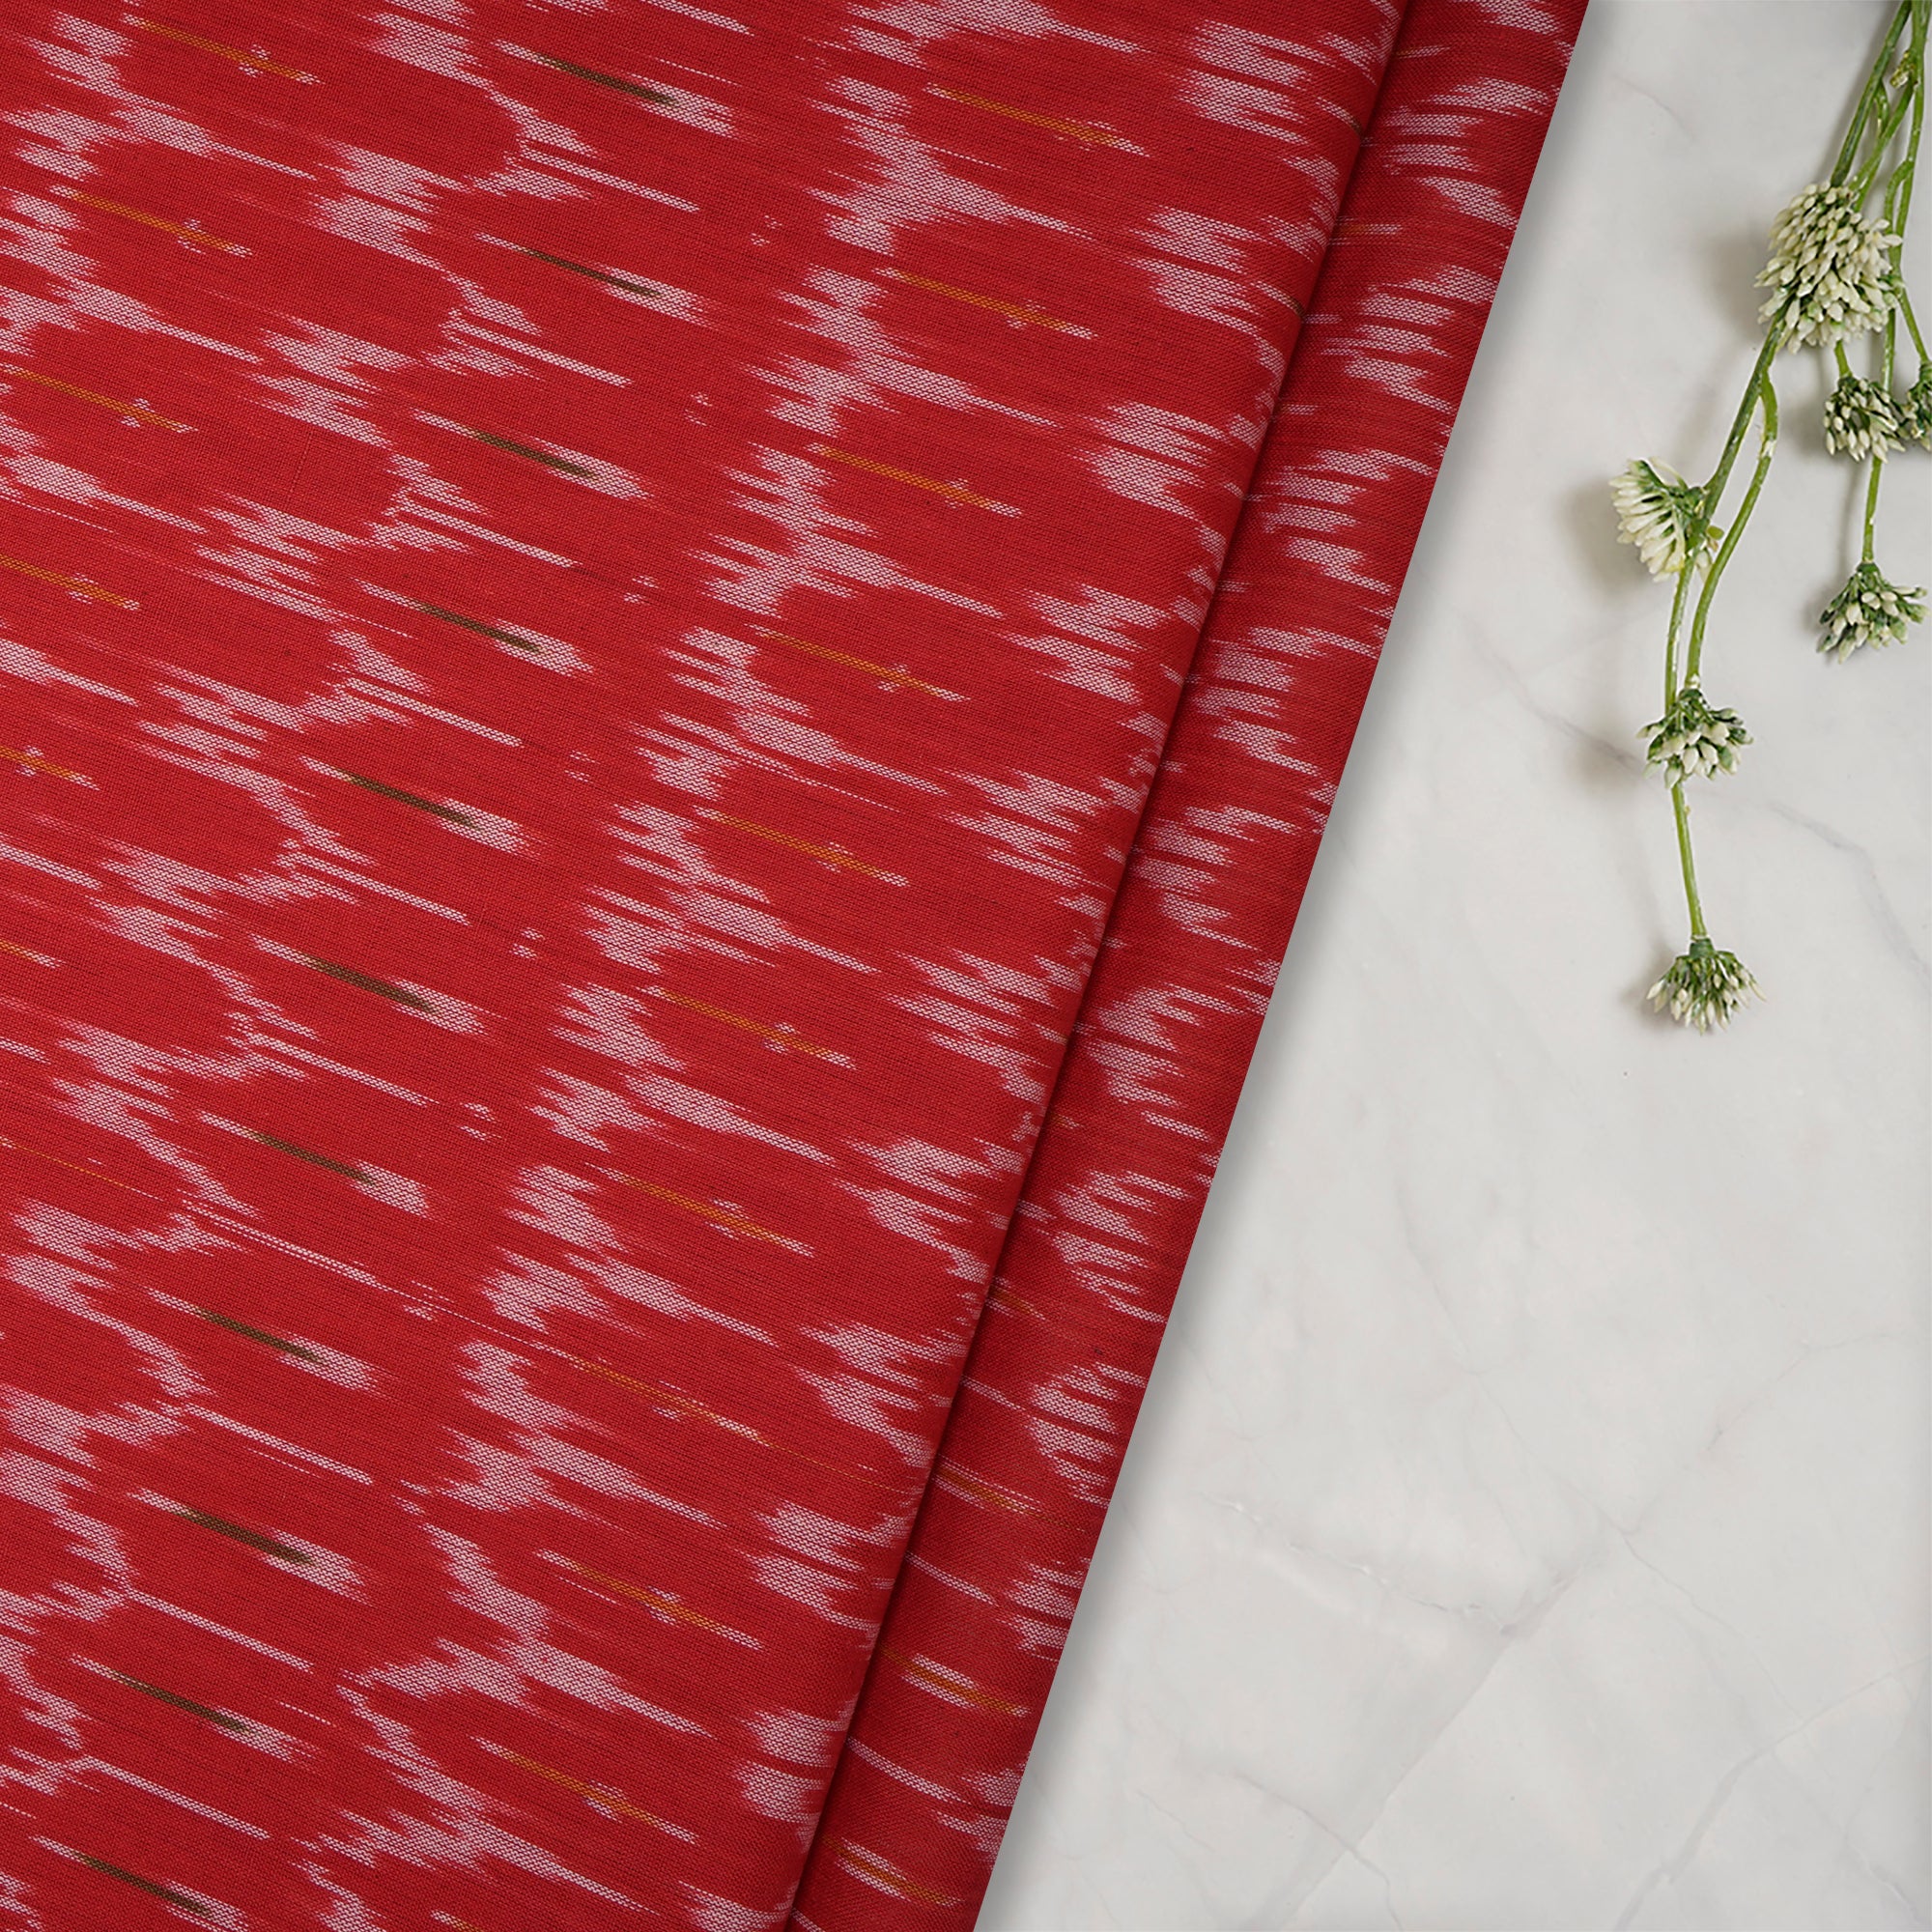 Cherry Red Washed Woven Ikat Cotton Fabric